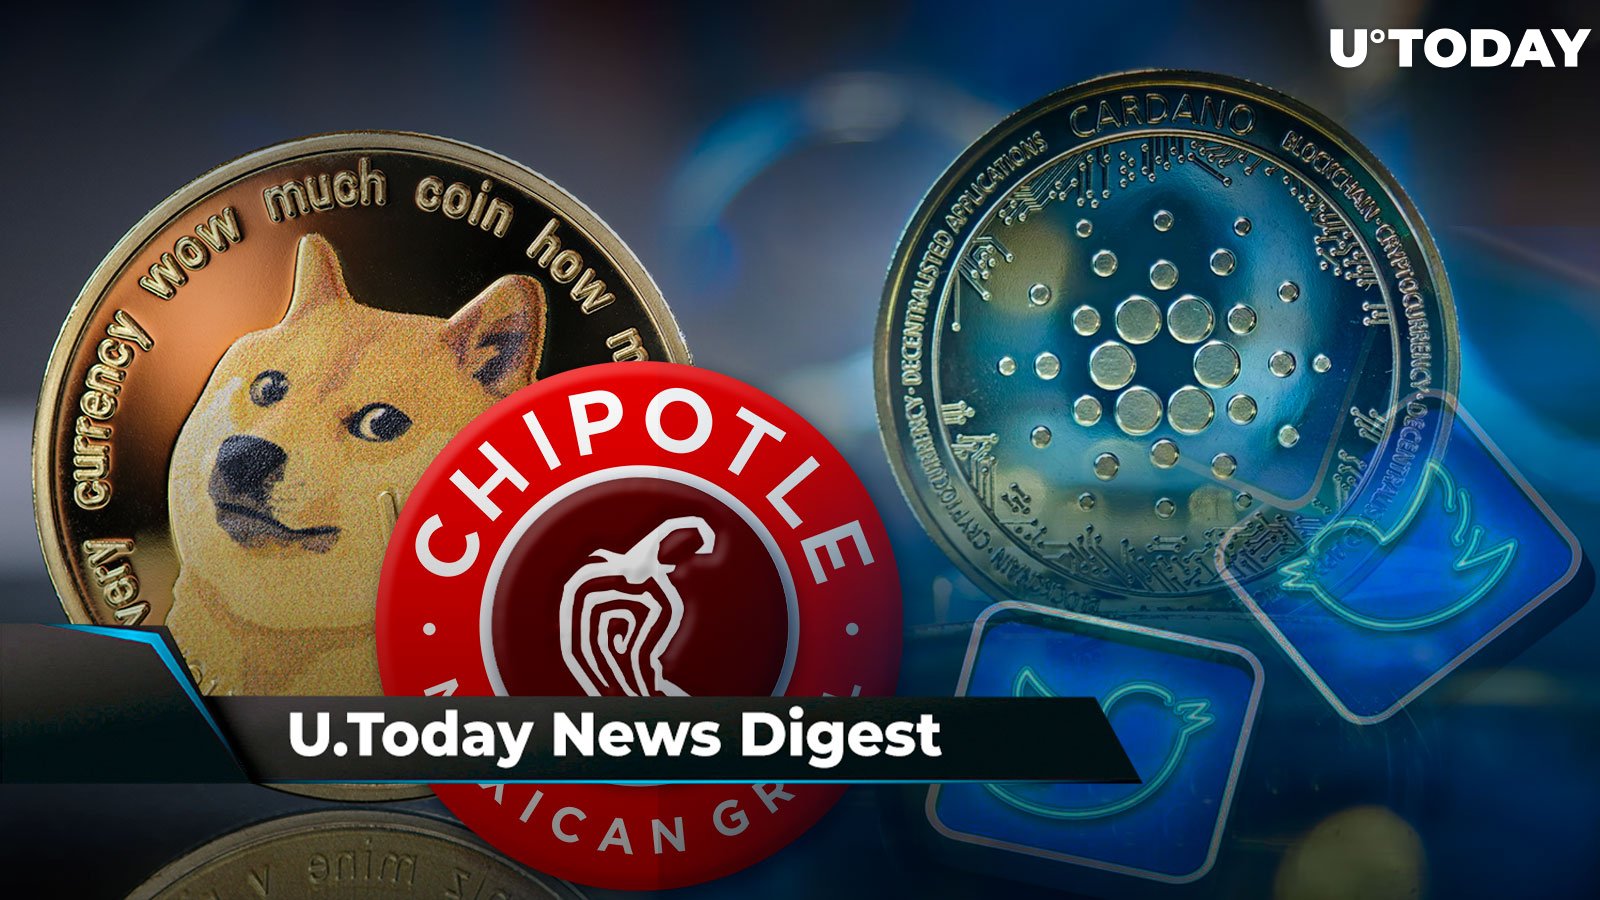 DOGE “Takes Over” Chipotle, SEC Fails to Revoke XRP Holders’ Amici Status, Cardano Loses Popularity on Twitter: Crypto News Digest by U.Today